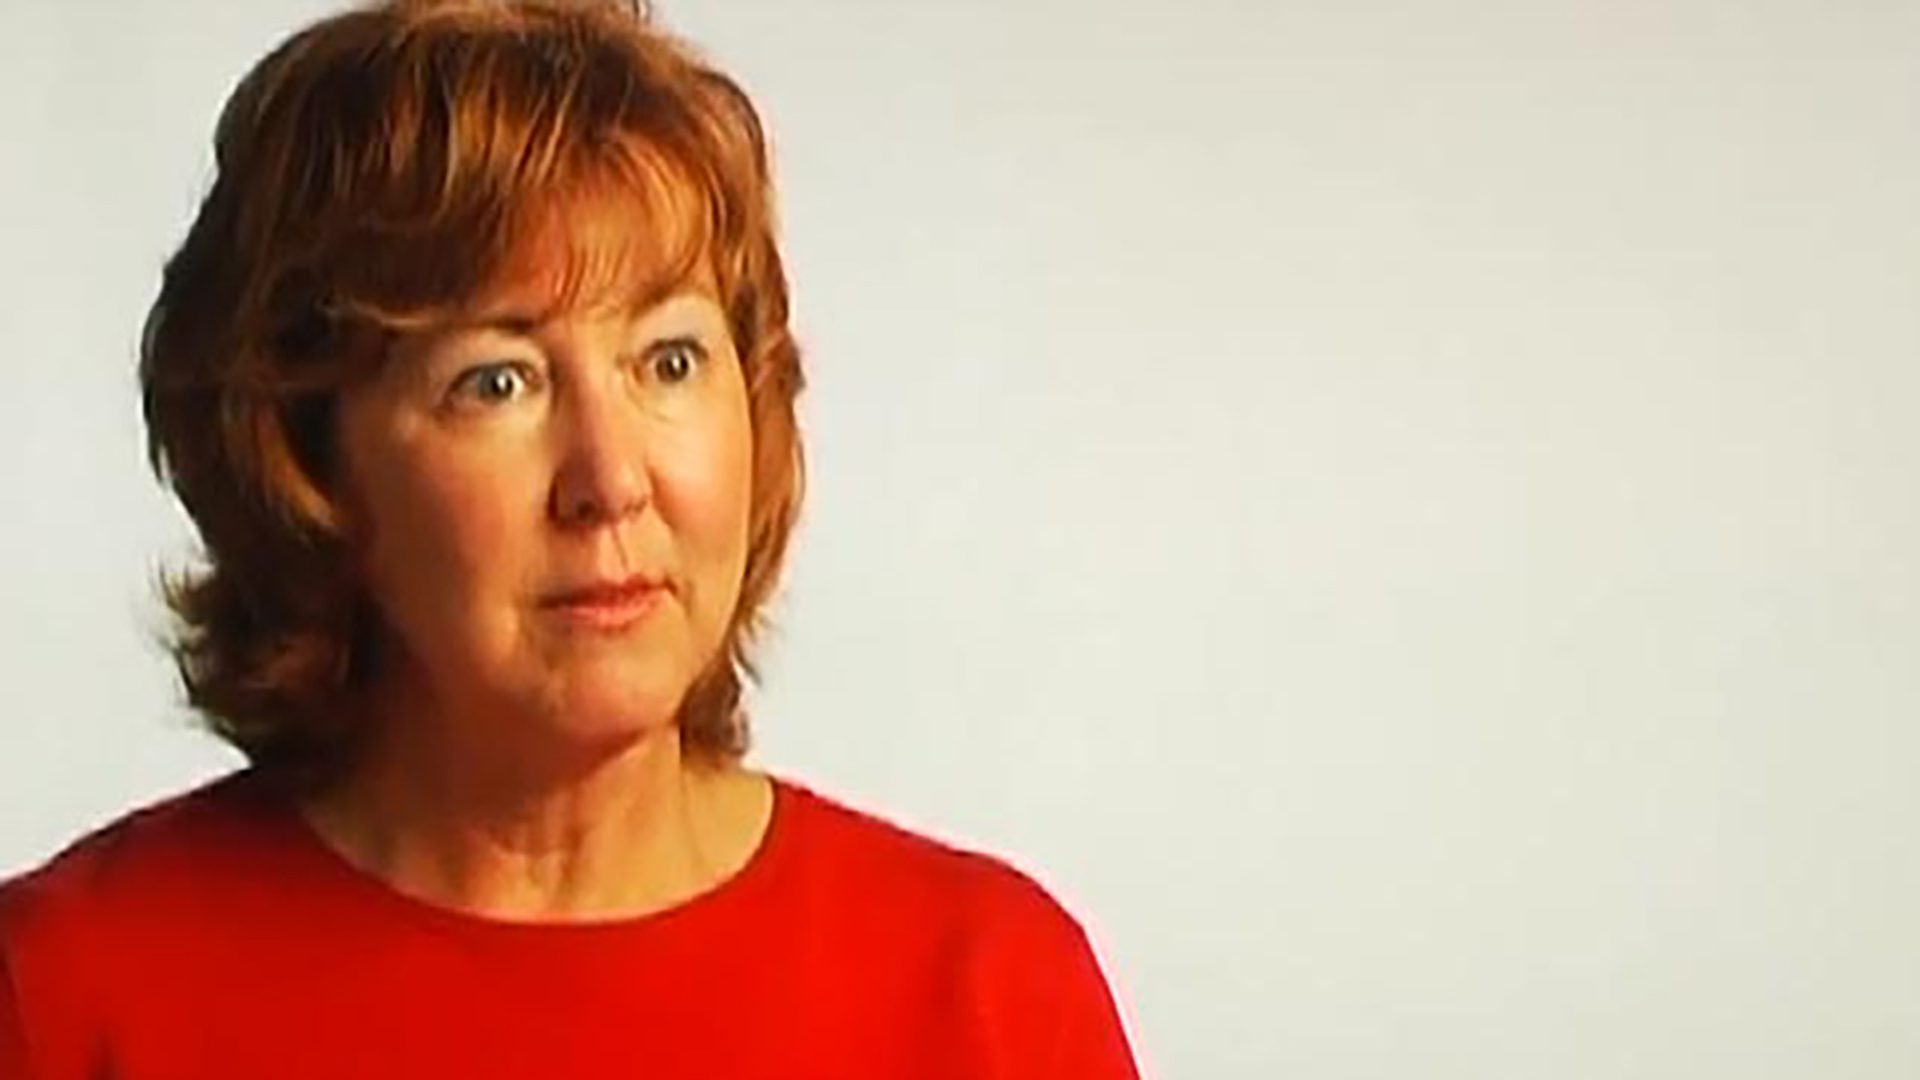 A middle-aged woman with red hair wears a red shirt and is interviewed against a white background.